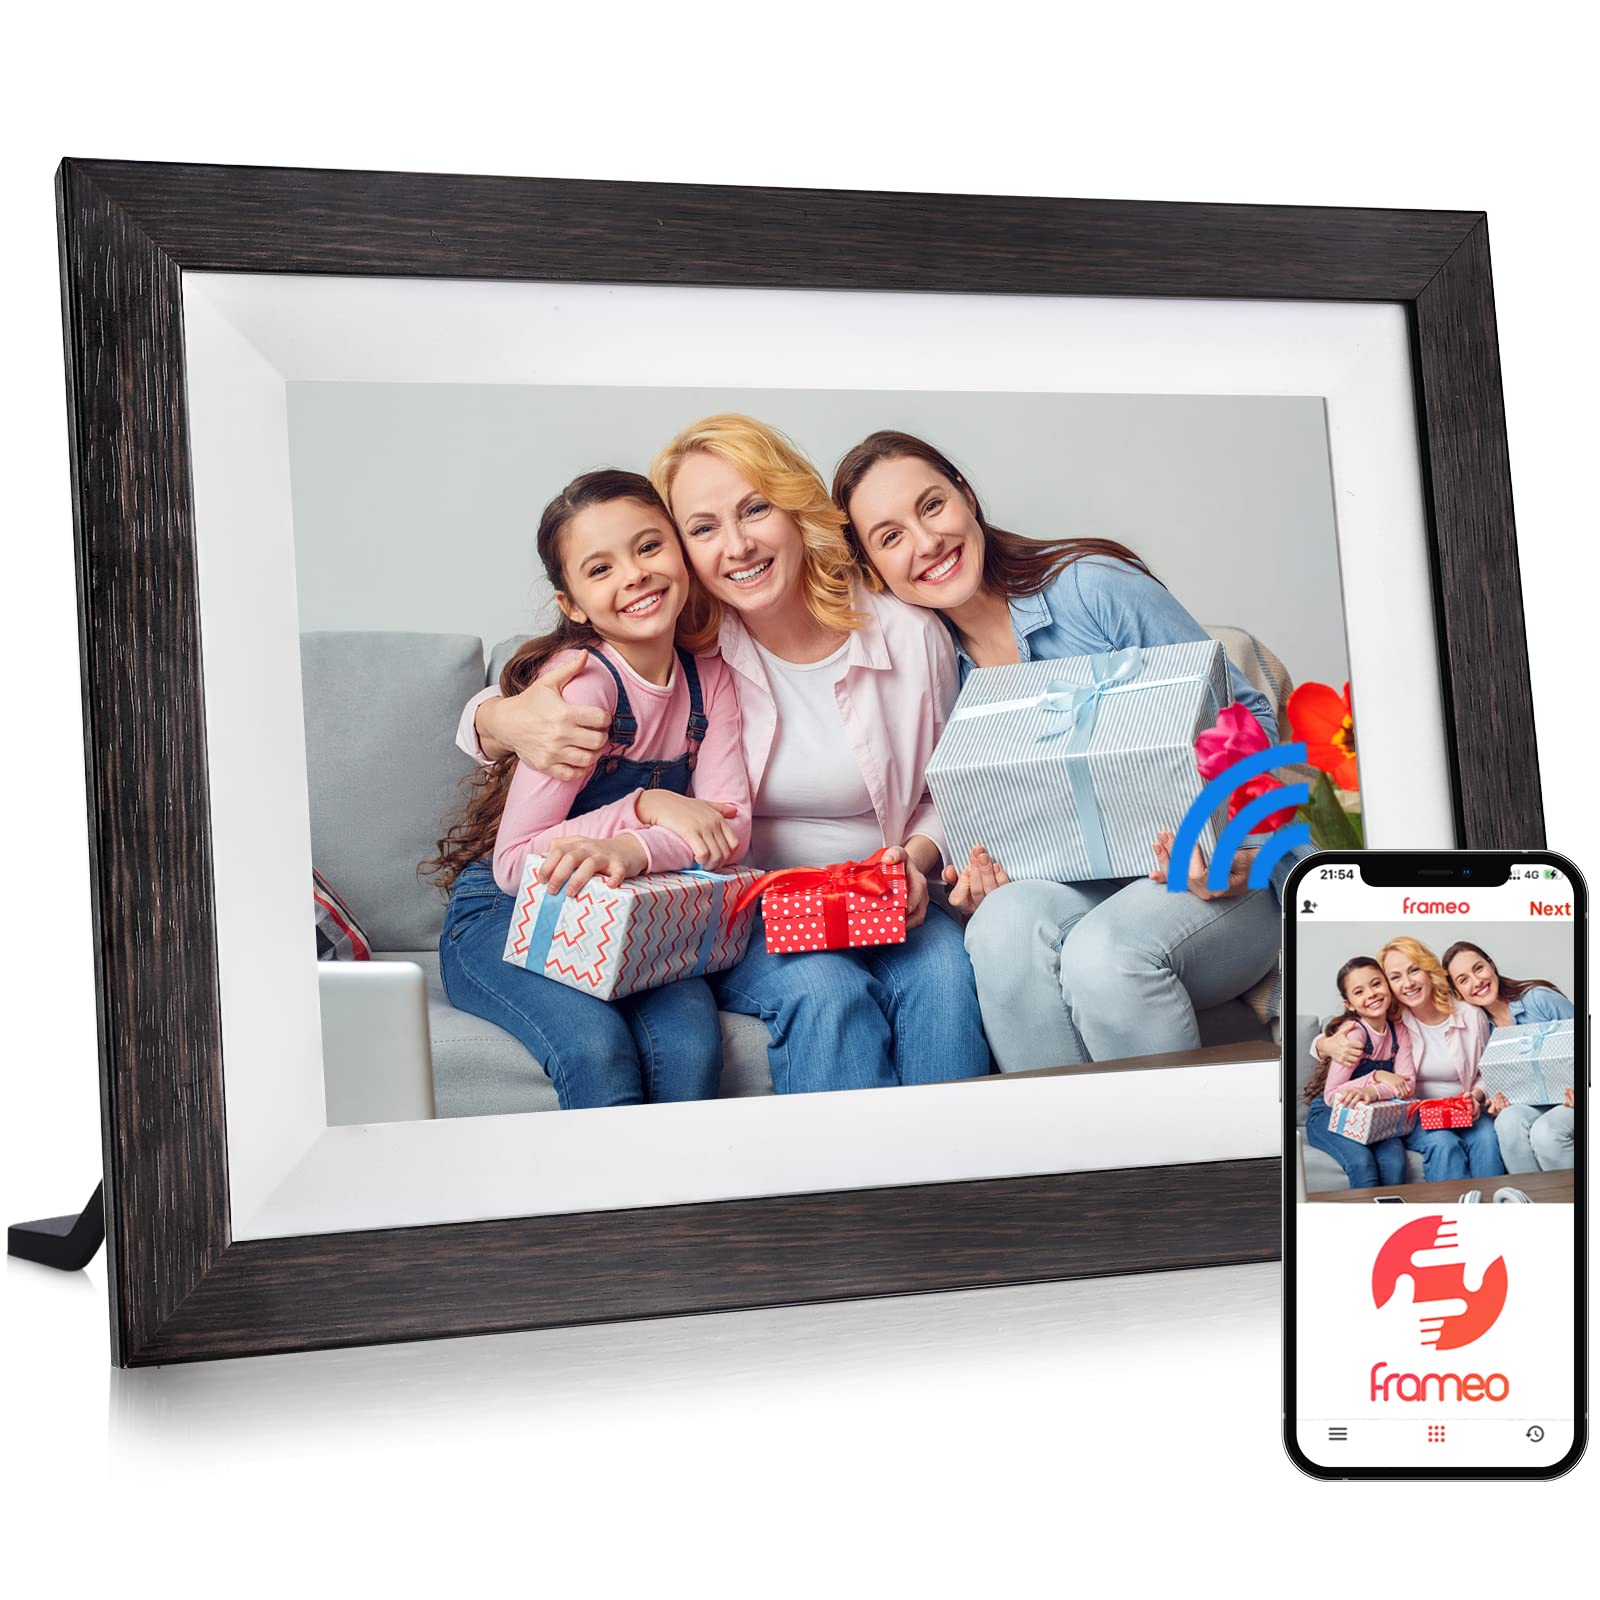 Frameo WiFi Digital Picture Frame 32GB Memory 10.1 Inch, 1280x800 HD IPS Touch Screen Photo Frame Electronic, Easy Setup, Share Photos or Videos Anywhere via Free Frameo APP